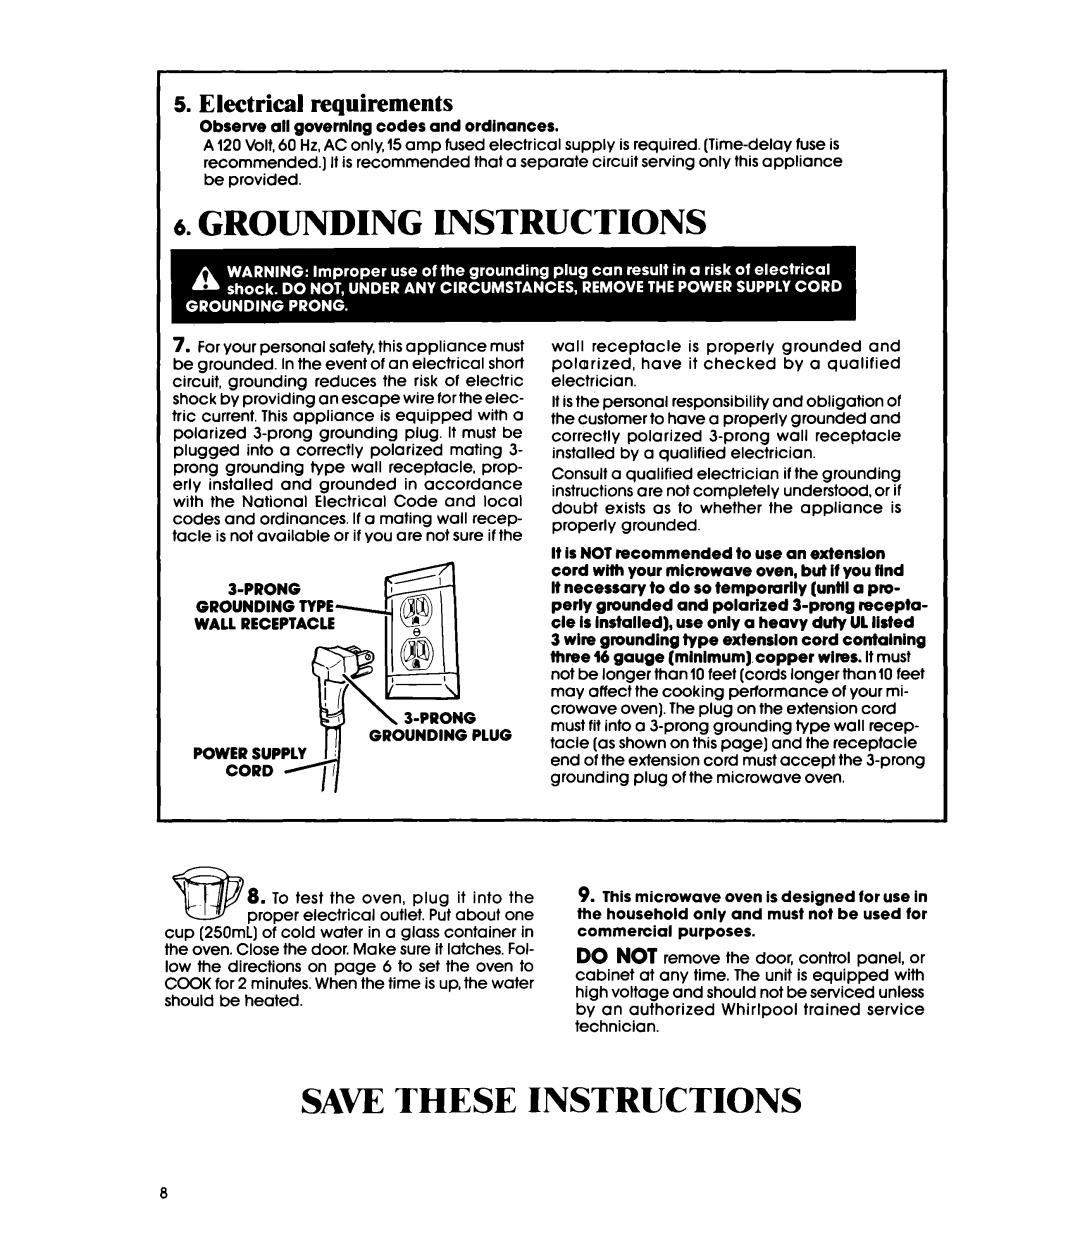 Whirlpool MWIOOOXS manual Grounding Instructions, Save These Instructions, Electrical requirements 